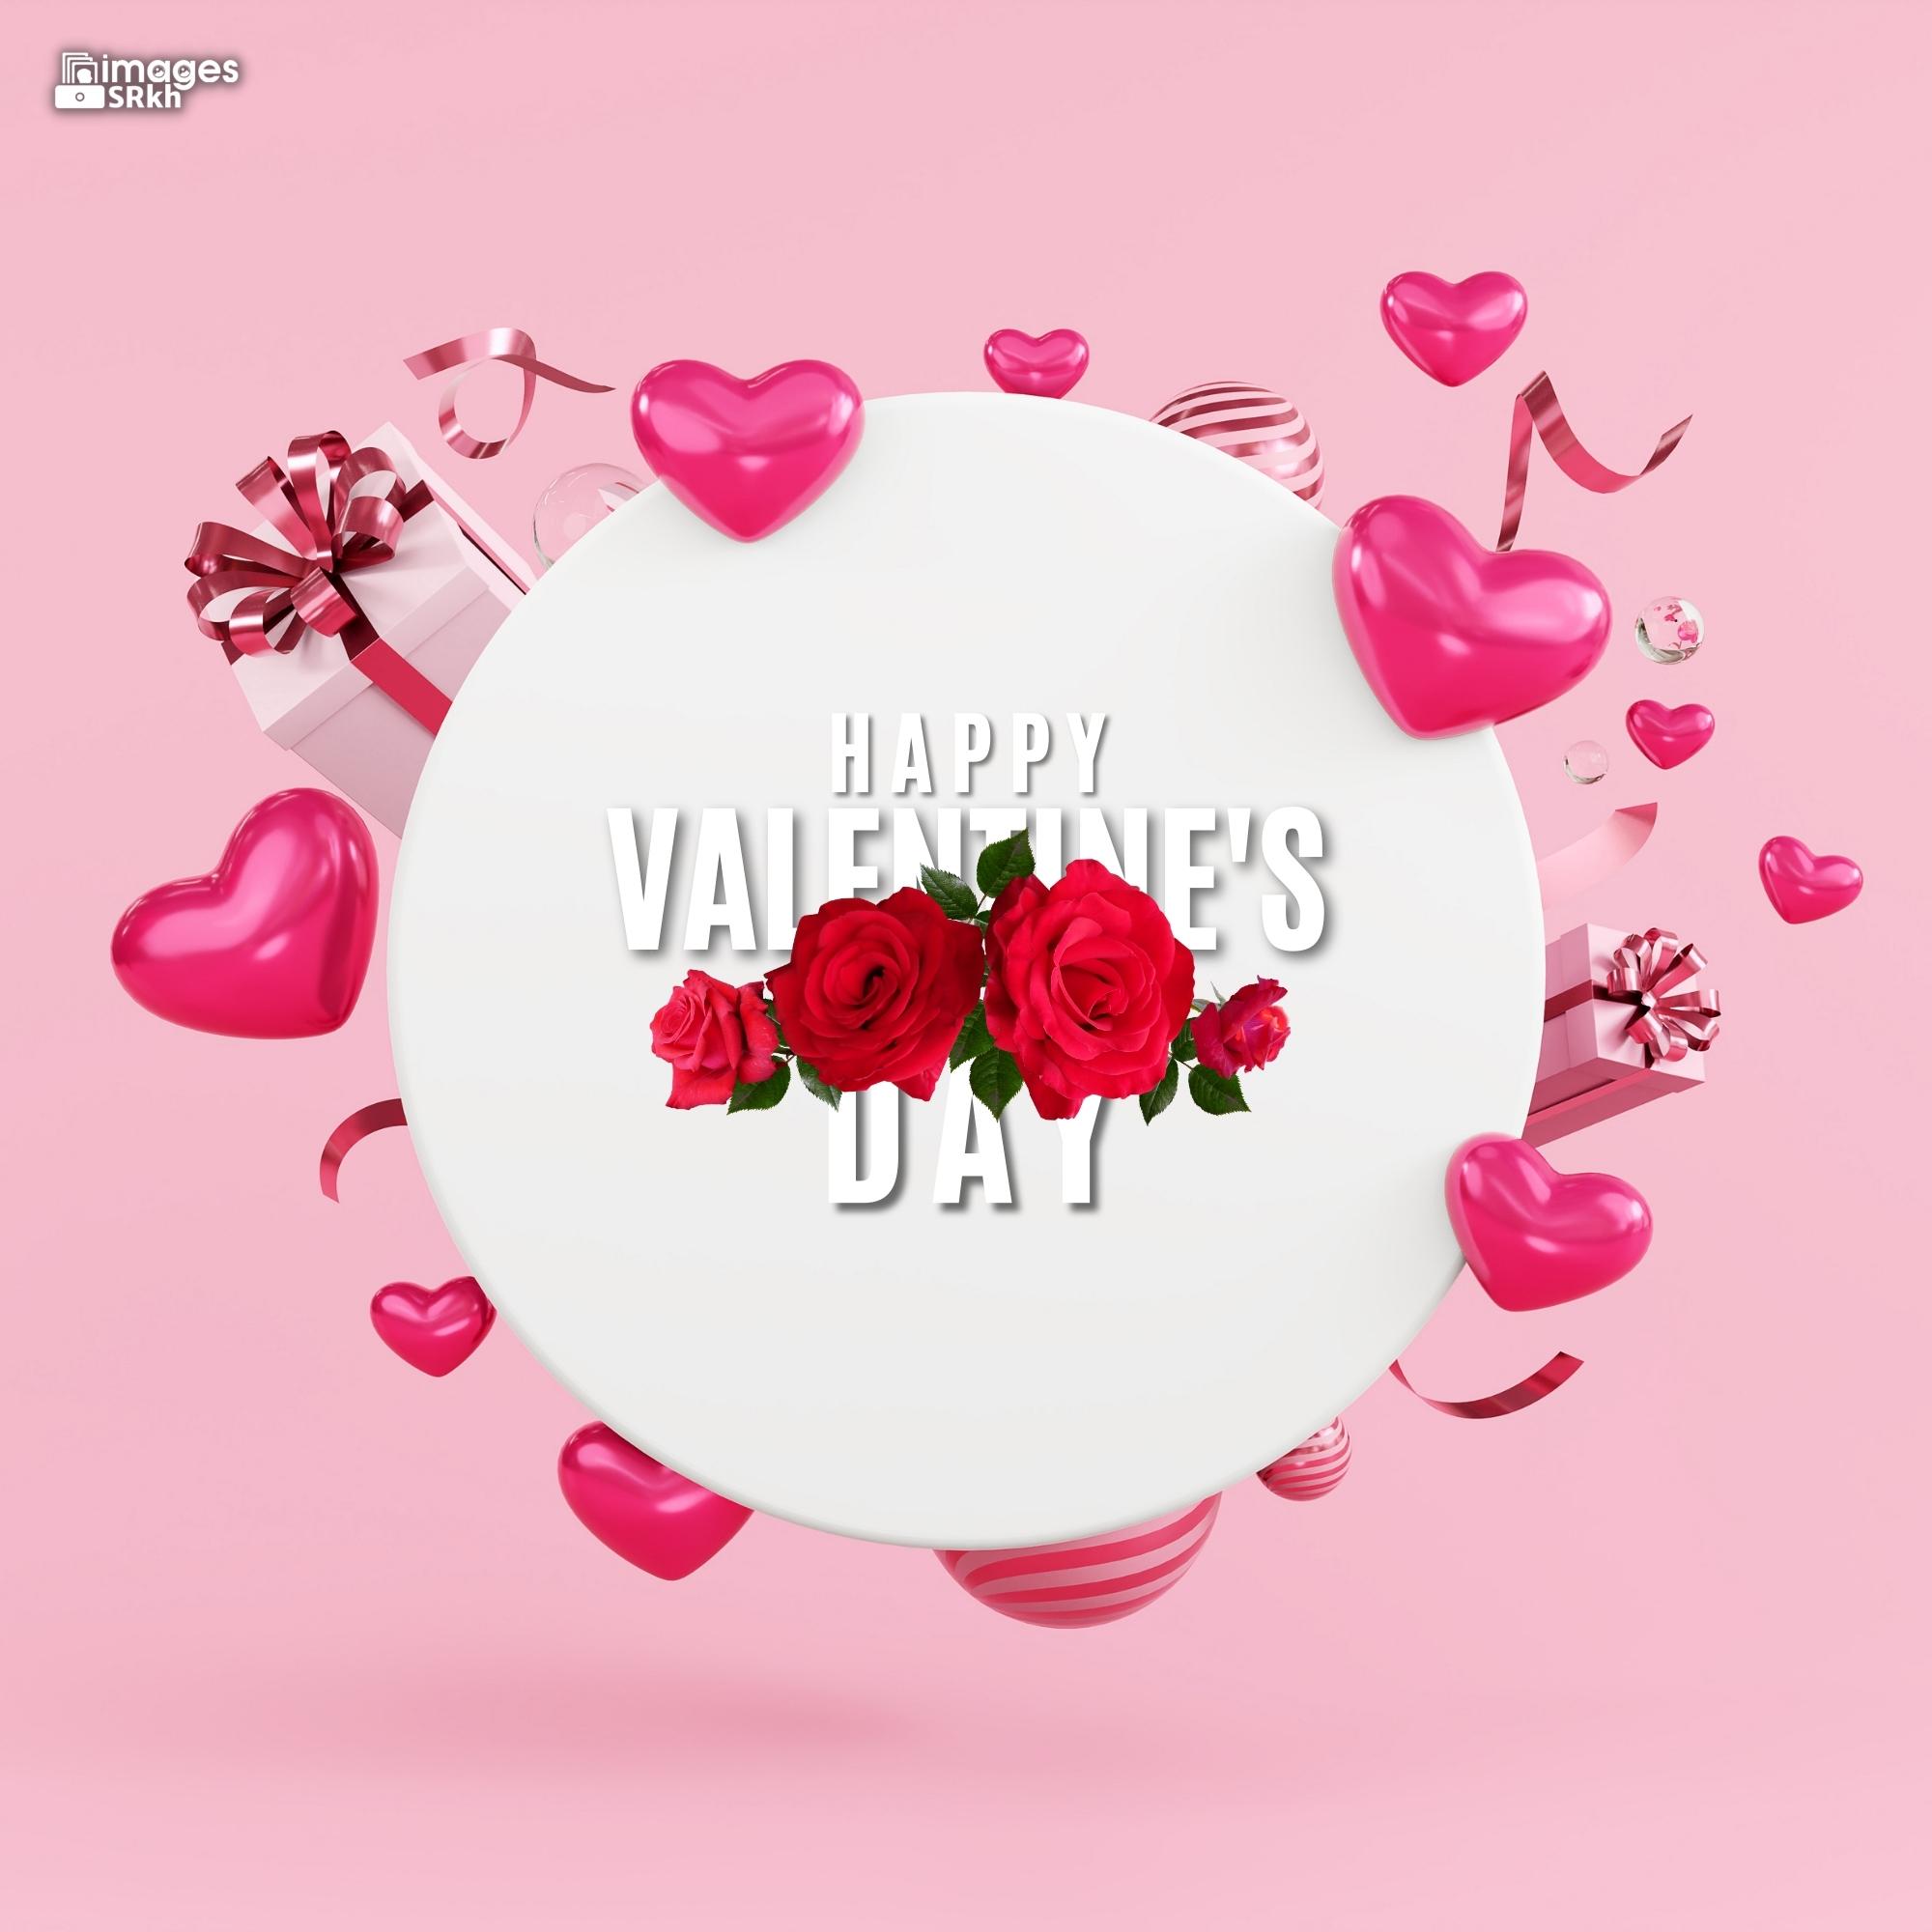 Happy Valentines Day | 538 | PREMIUM IMAGES | Wishes for Love